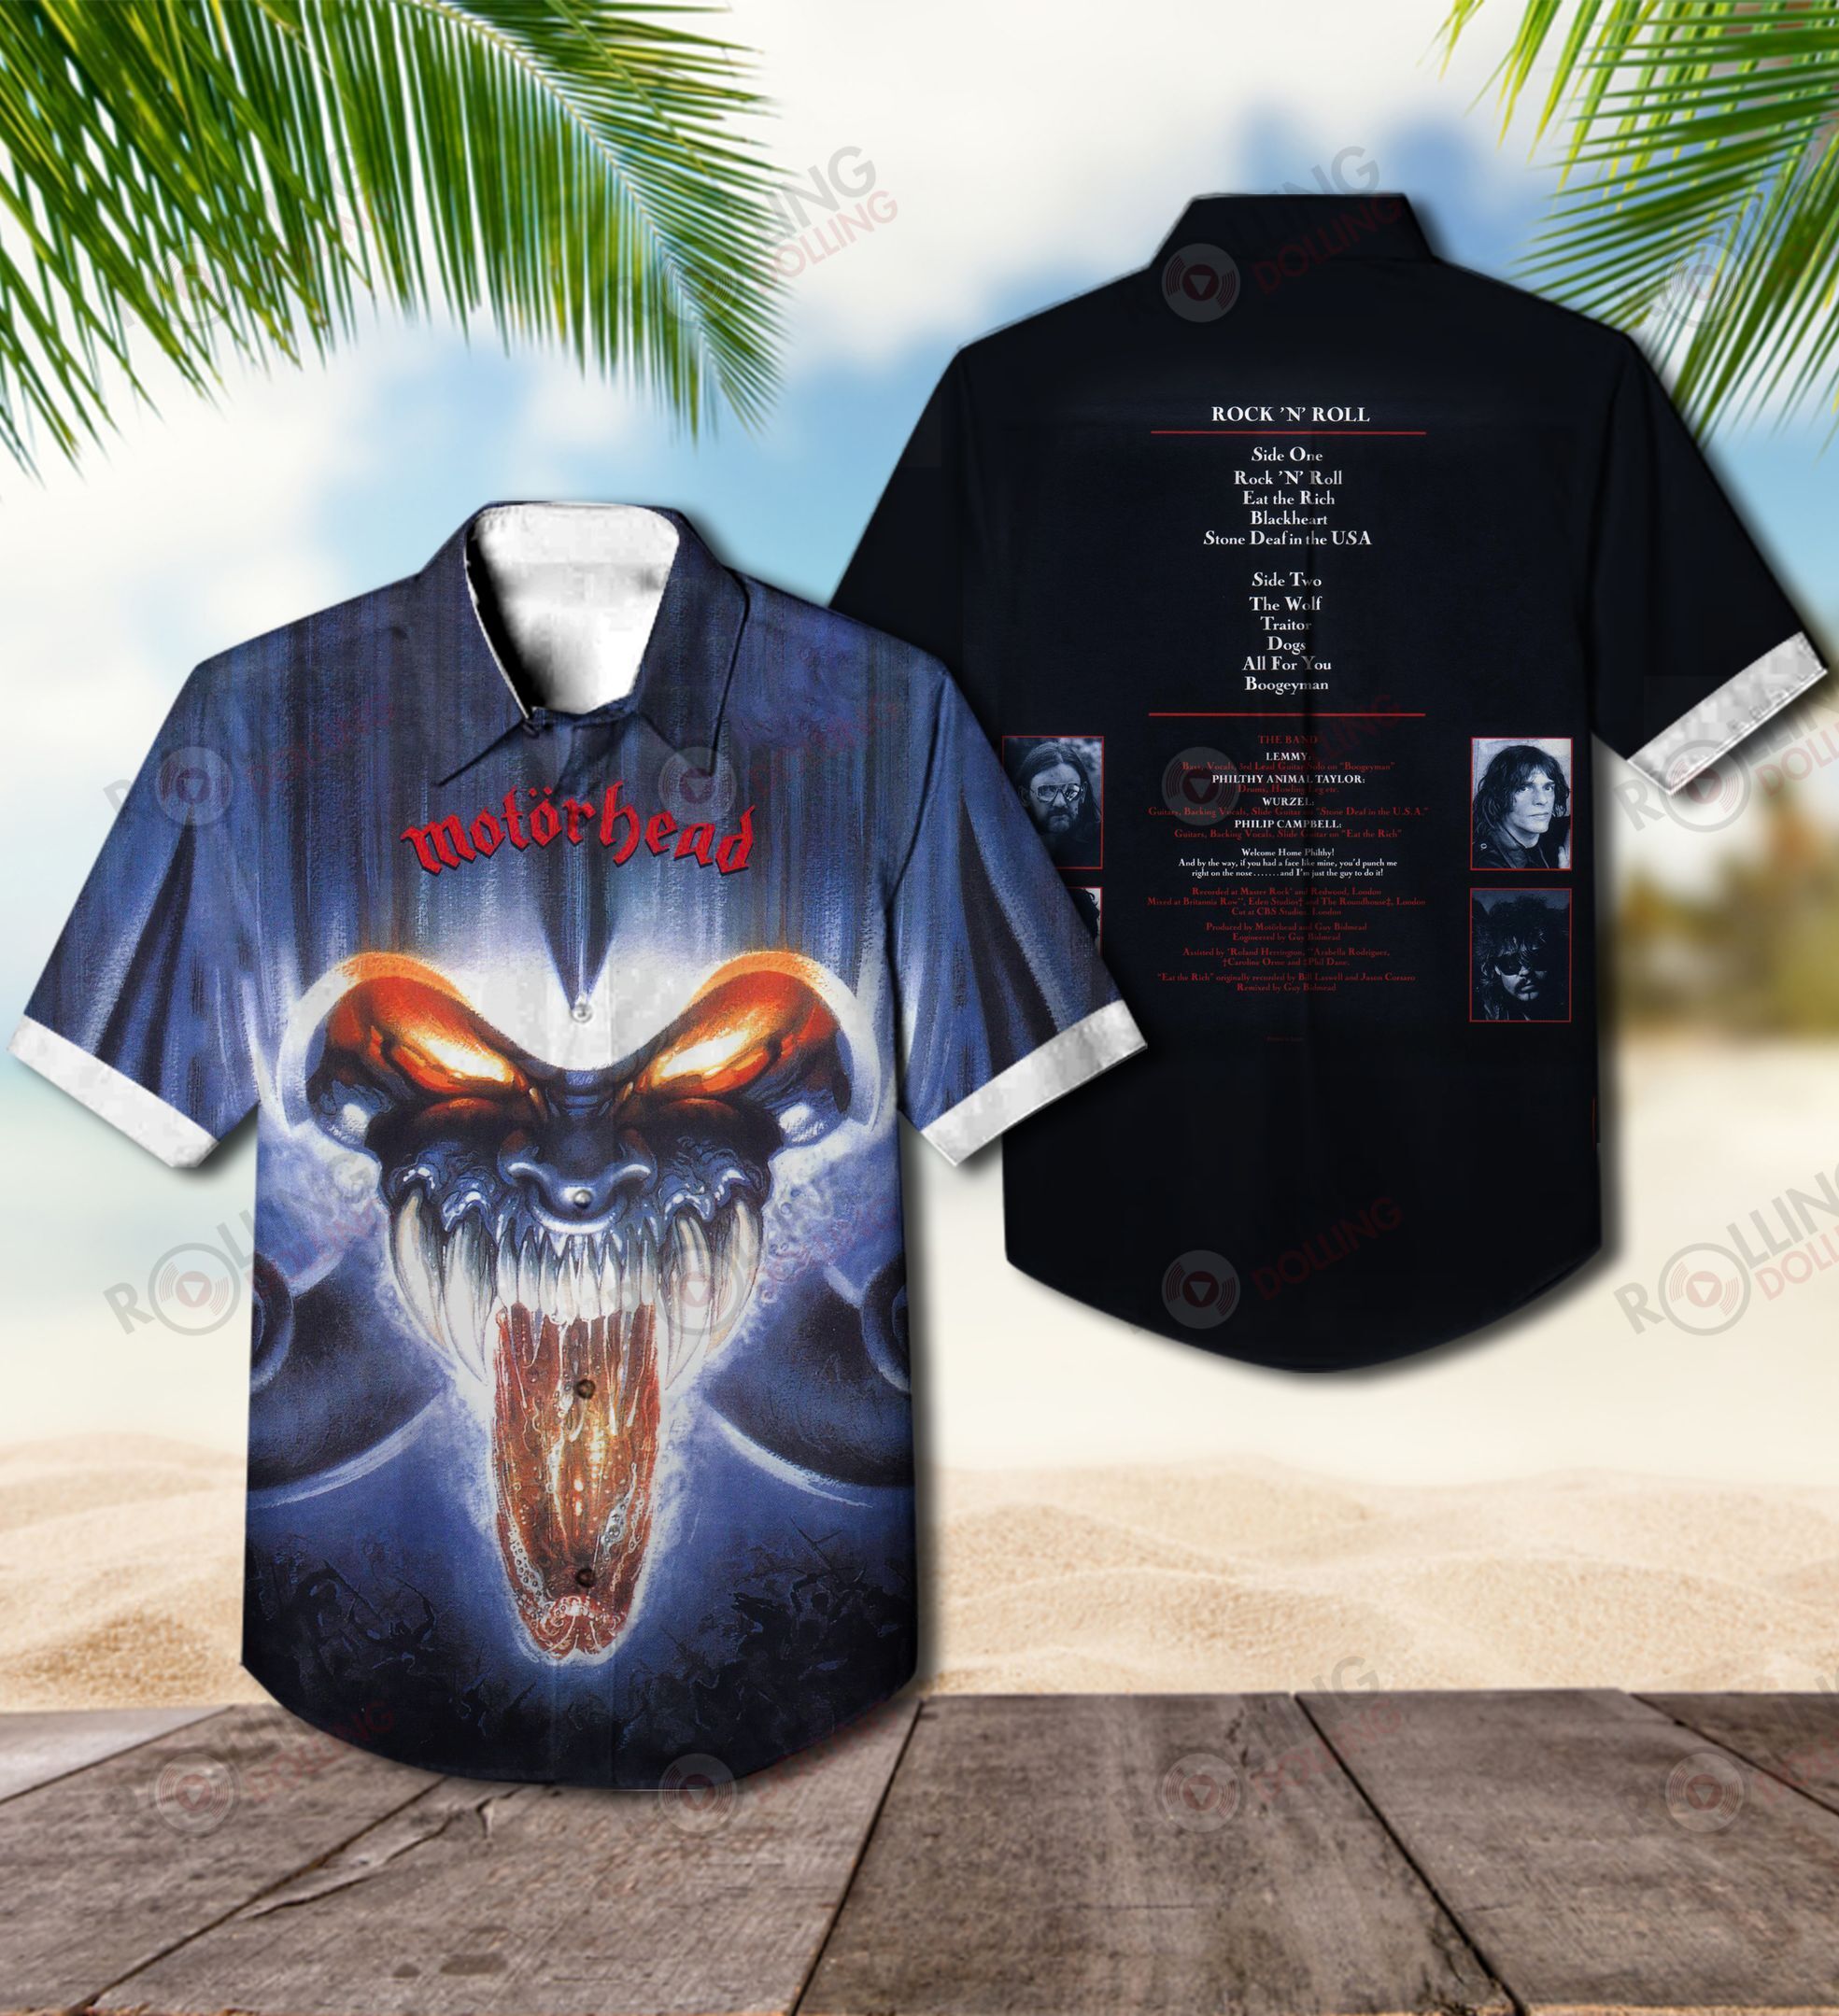 Check out these top 100+ Hawaiian shirt so cool for rock fans 367